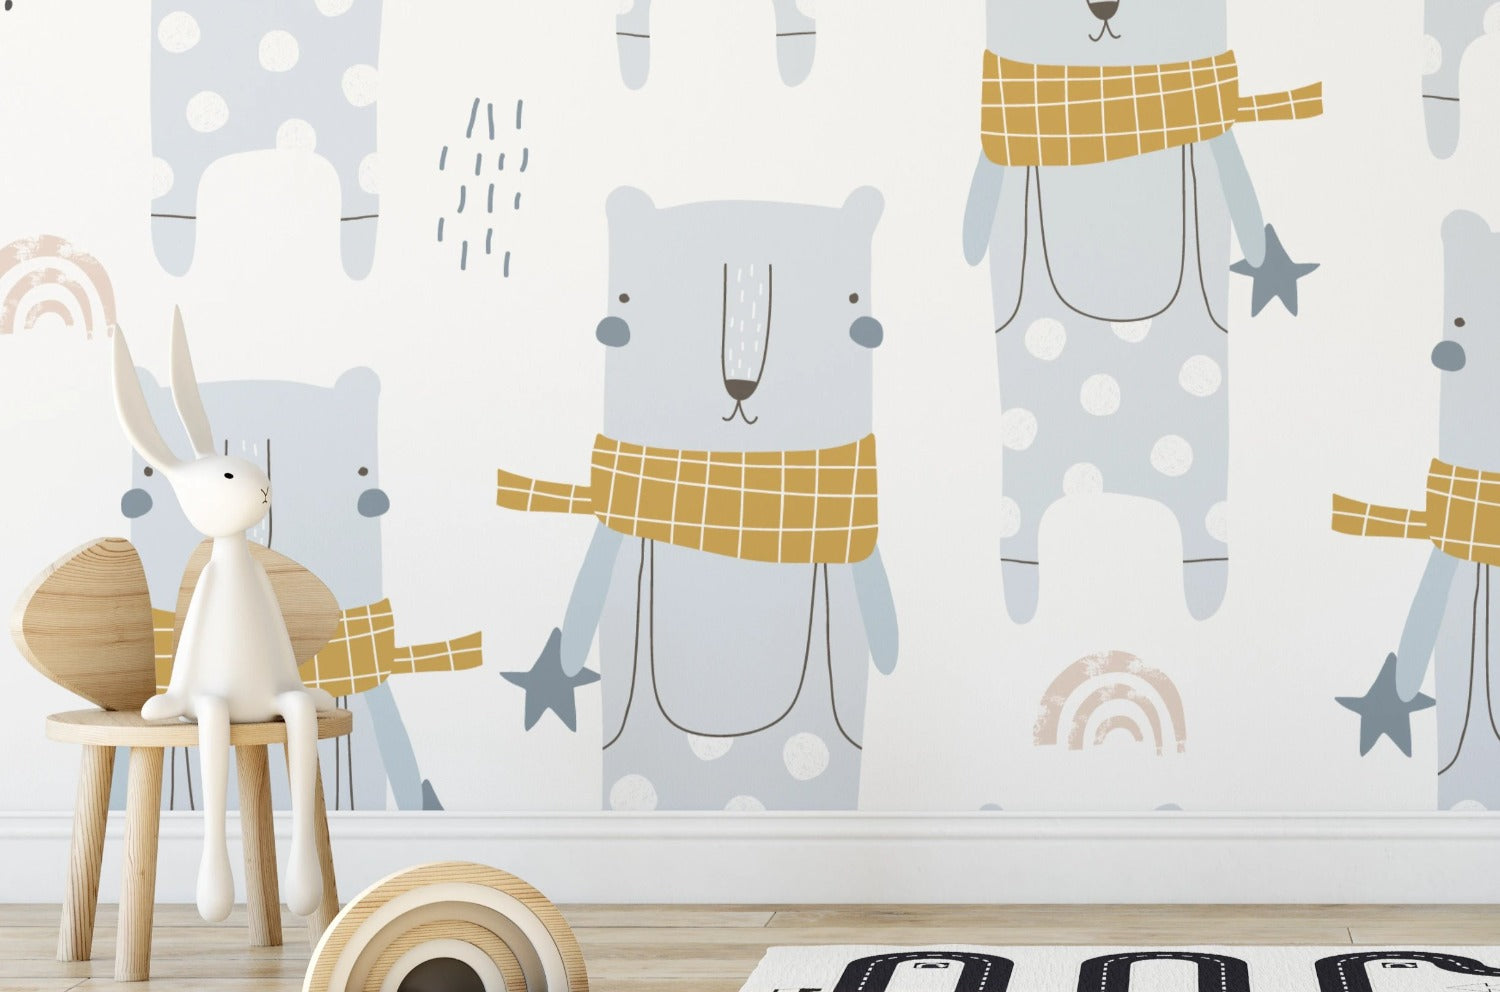 Child's Room Decorated with Polar Bear Express Wallpaper Featuring Polar Bears in Scarves